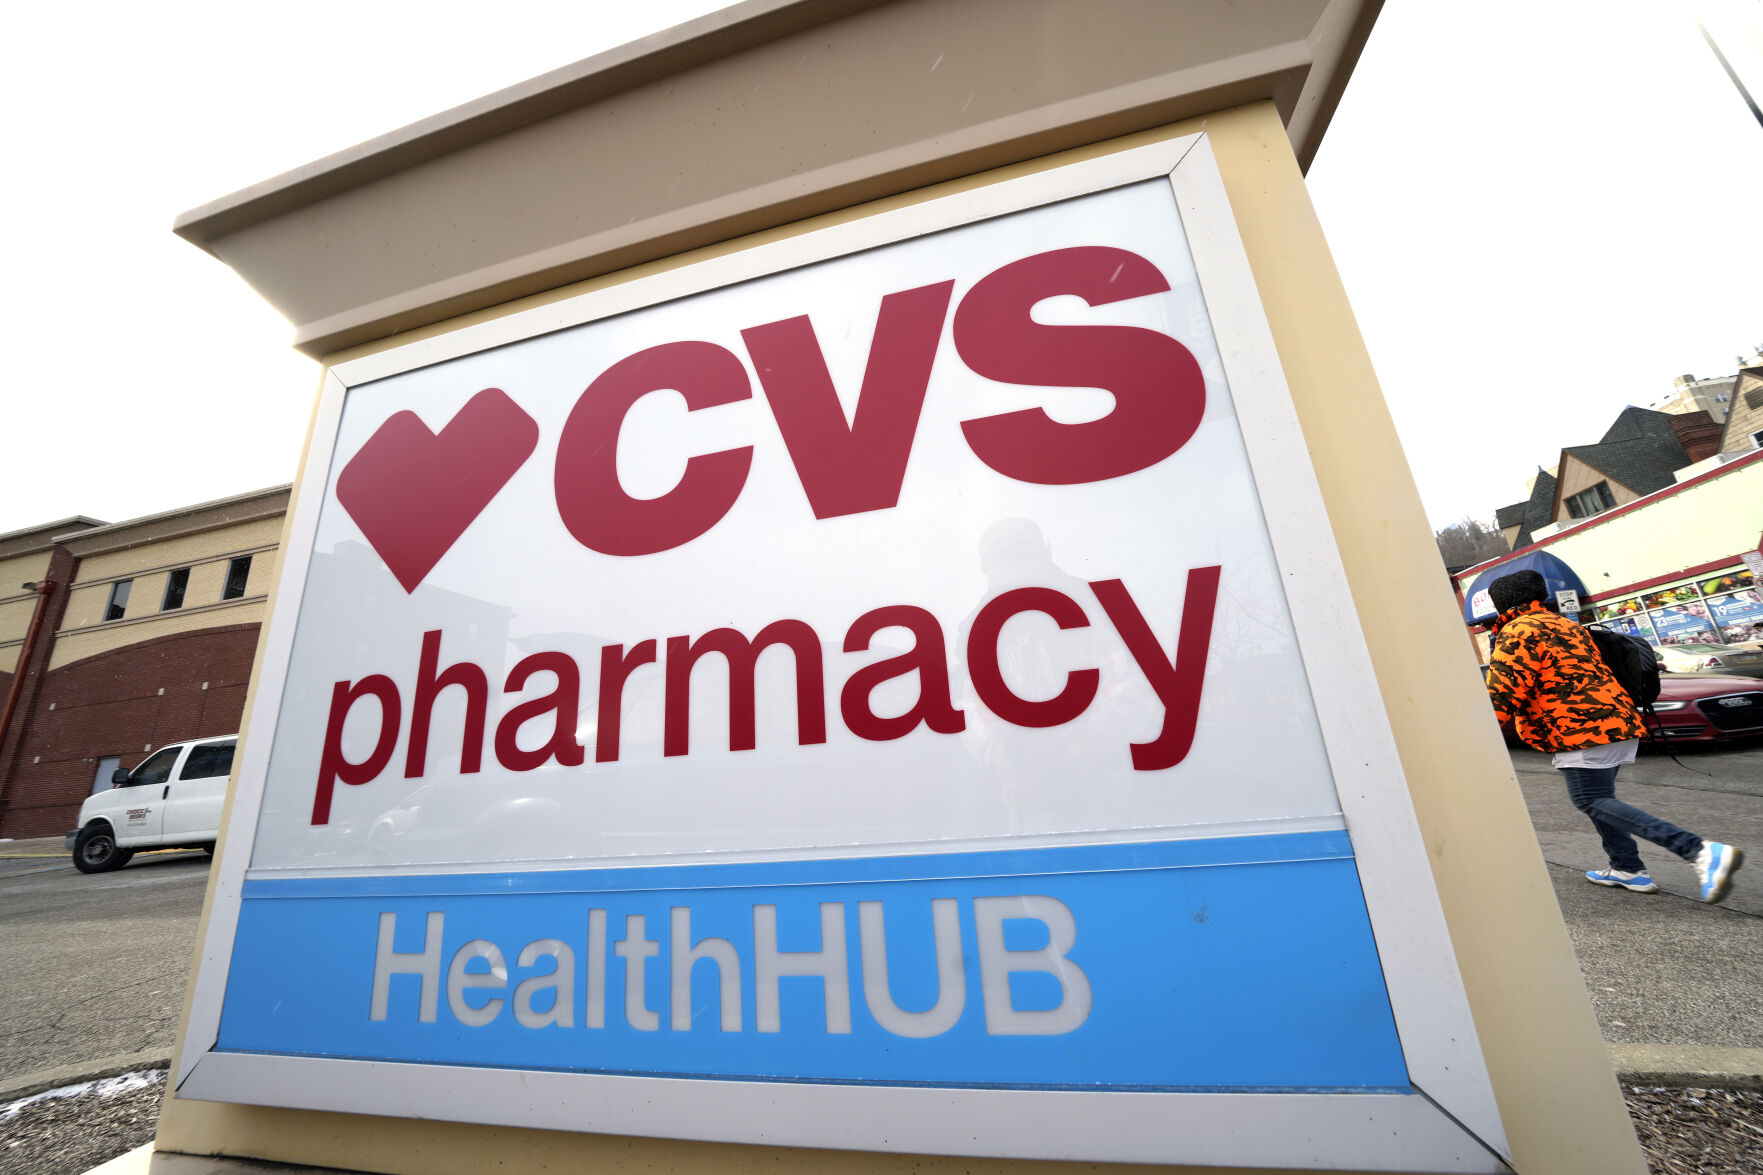 <p>A CVS store sign is displayed in Pittsburgh on Friday, Feb. 3, 2023. CVS Health is plunging deeper into primary care services, buying Oak Street Health for approximately $10.6 billion. The drugstore chain said Wednesday, Feb. 8, 2023, it would pay $39 per share in cash for each share of Oak Street Health in a deal expected to close this year. (AP Photo/Gene J. Puskar)</p>   PHOTO CREDIT: Gene J. Puskar 